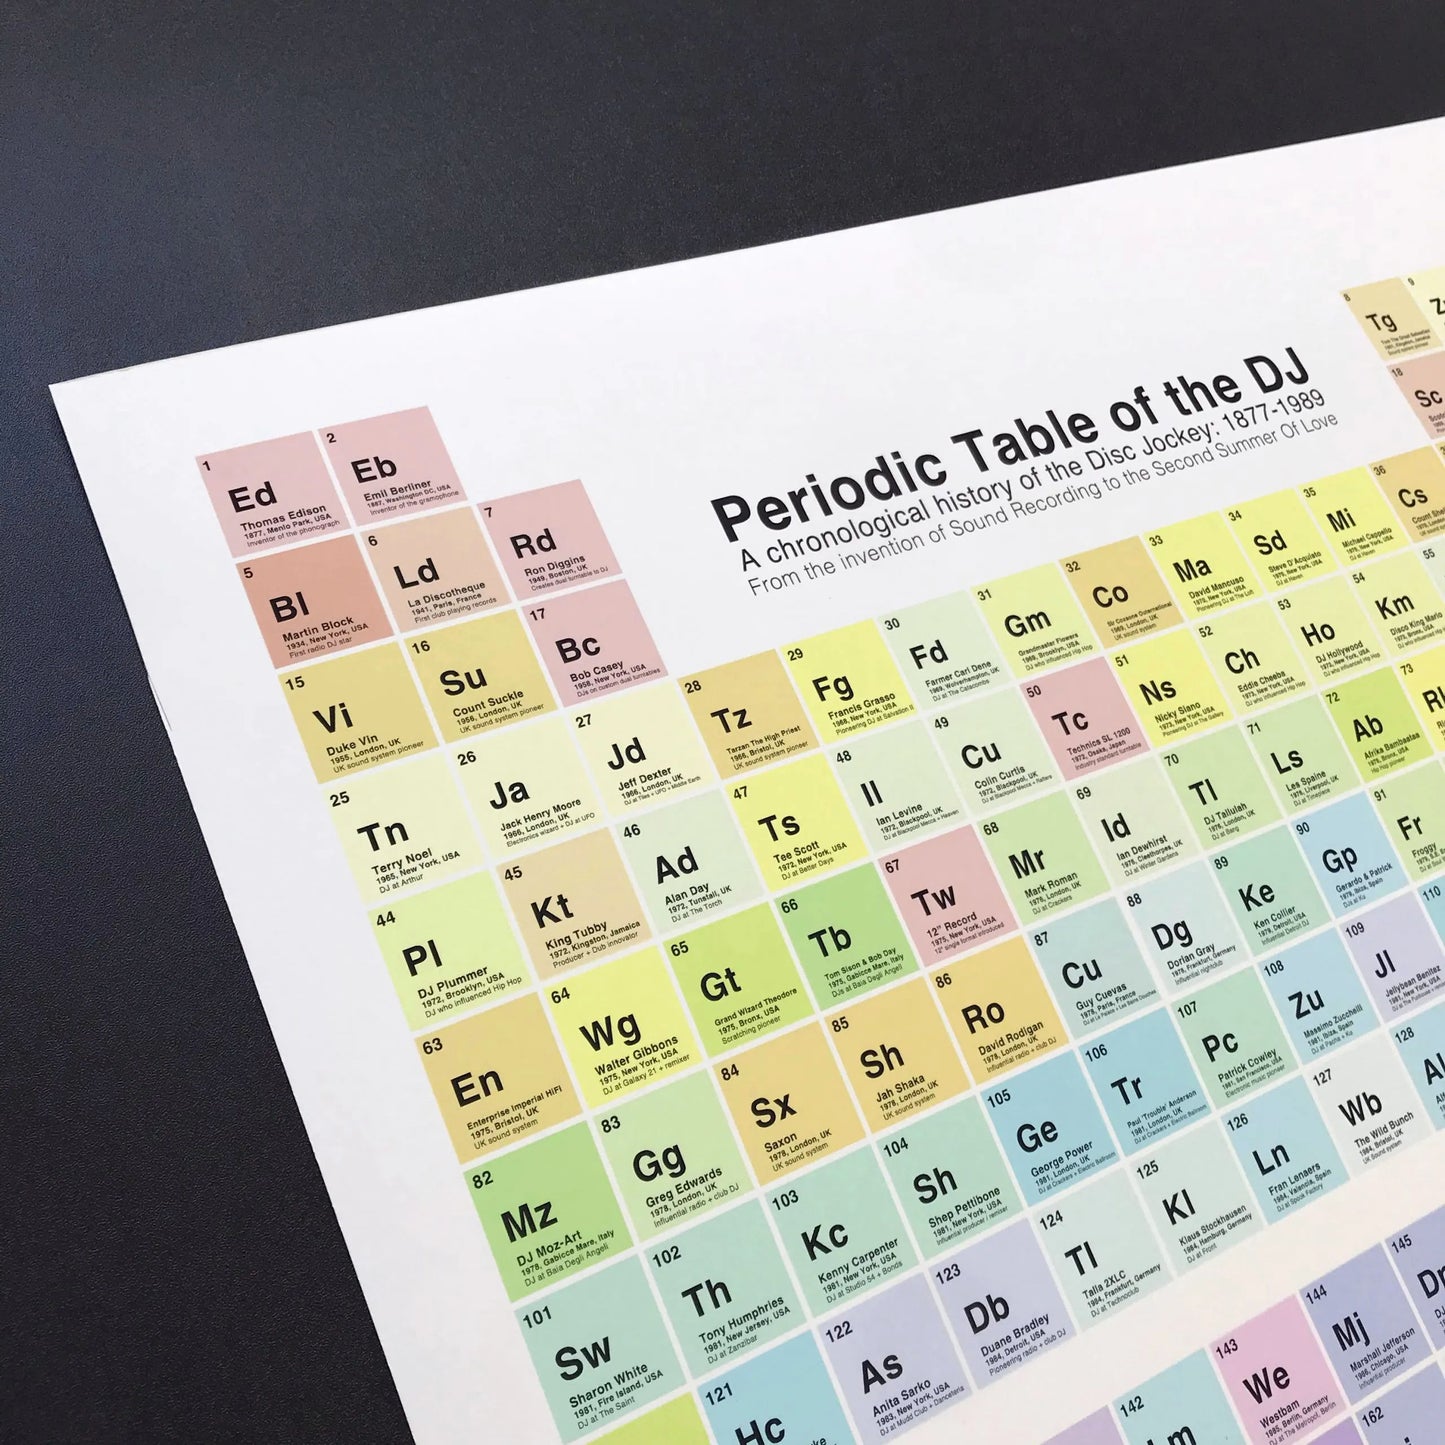 Periodic Table Of The DJ (A2), 2021